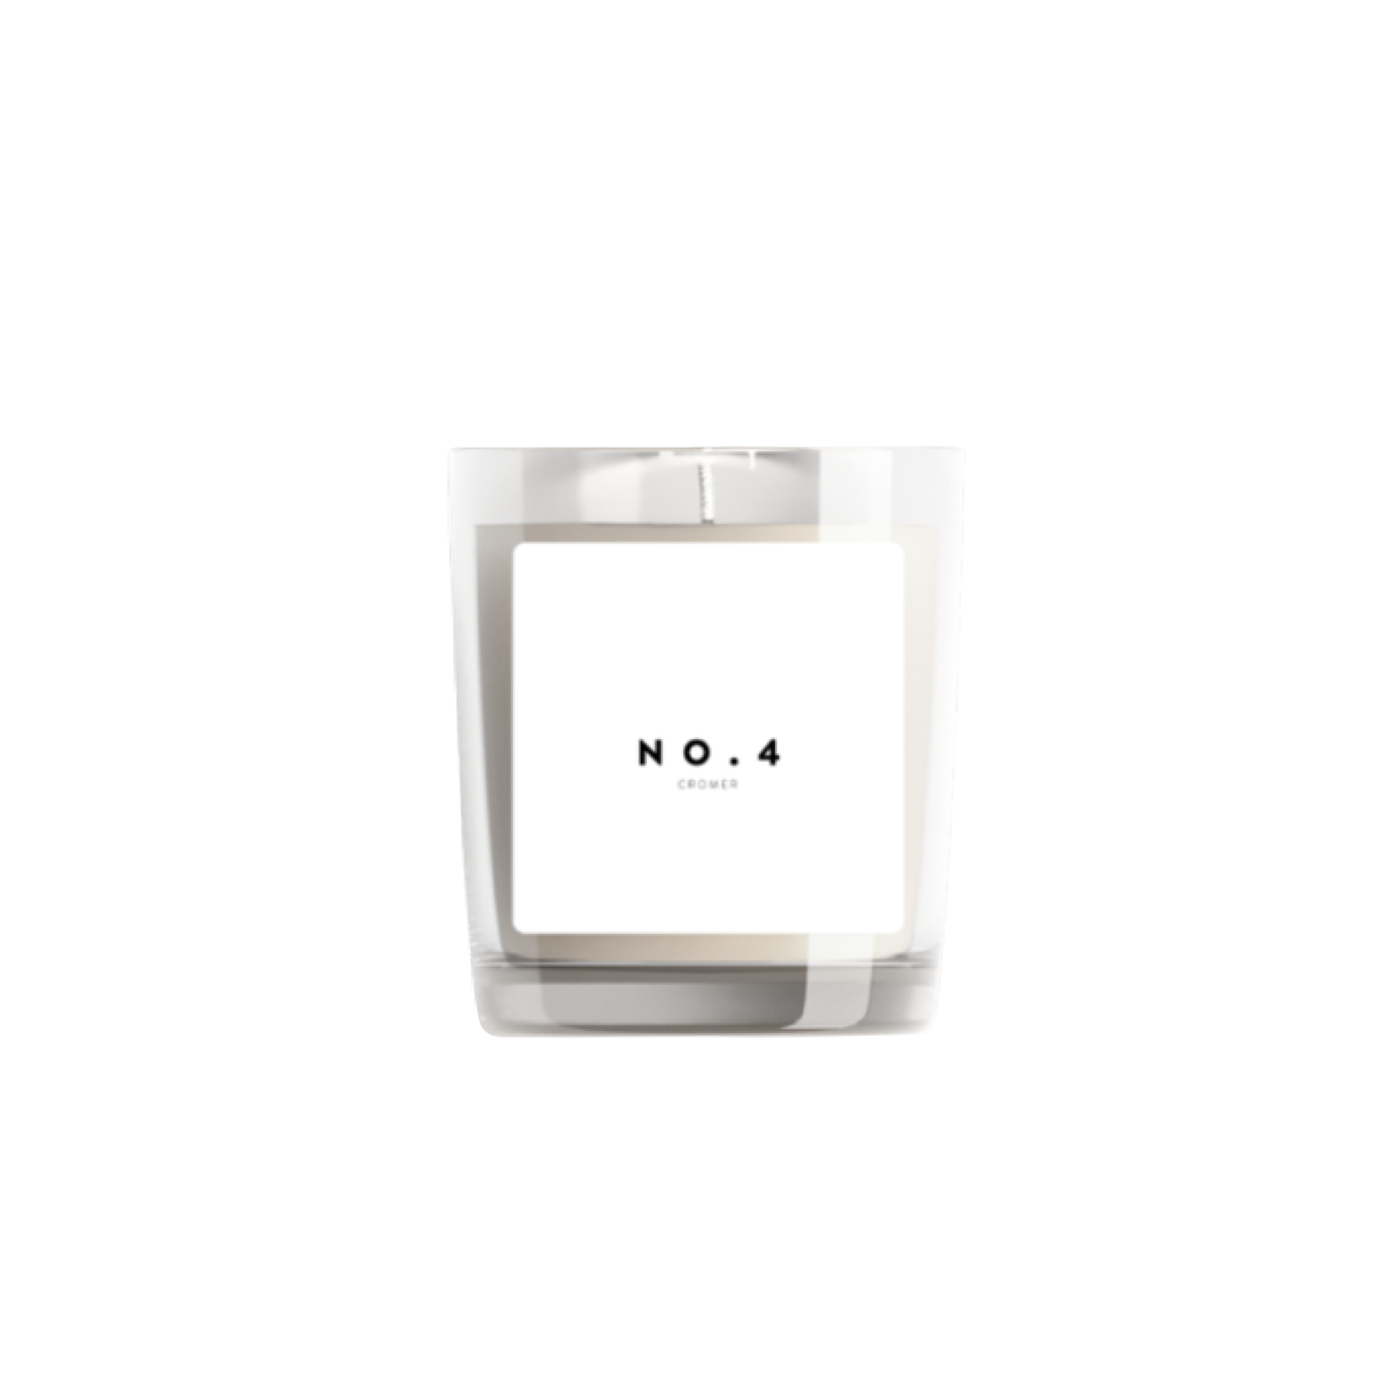 The Candle - No. 4 Scent